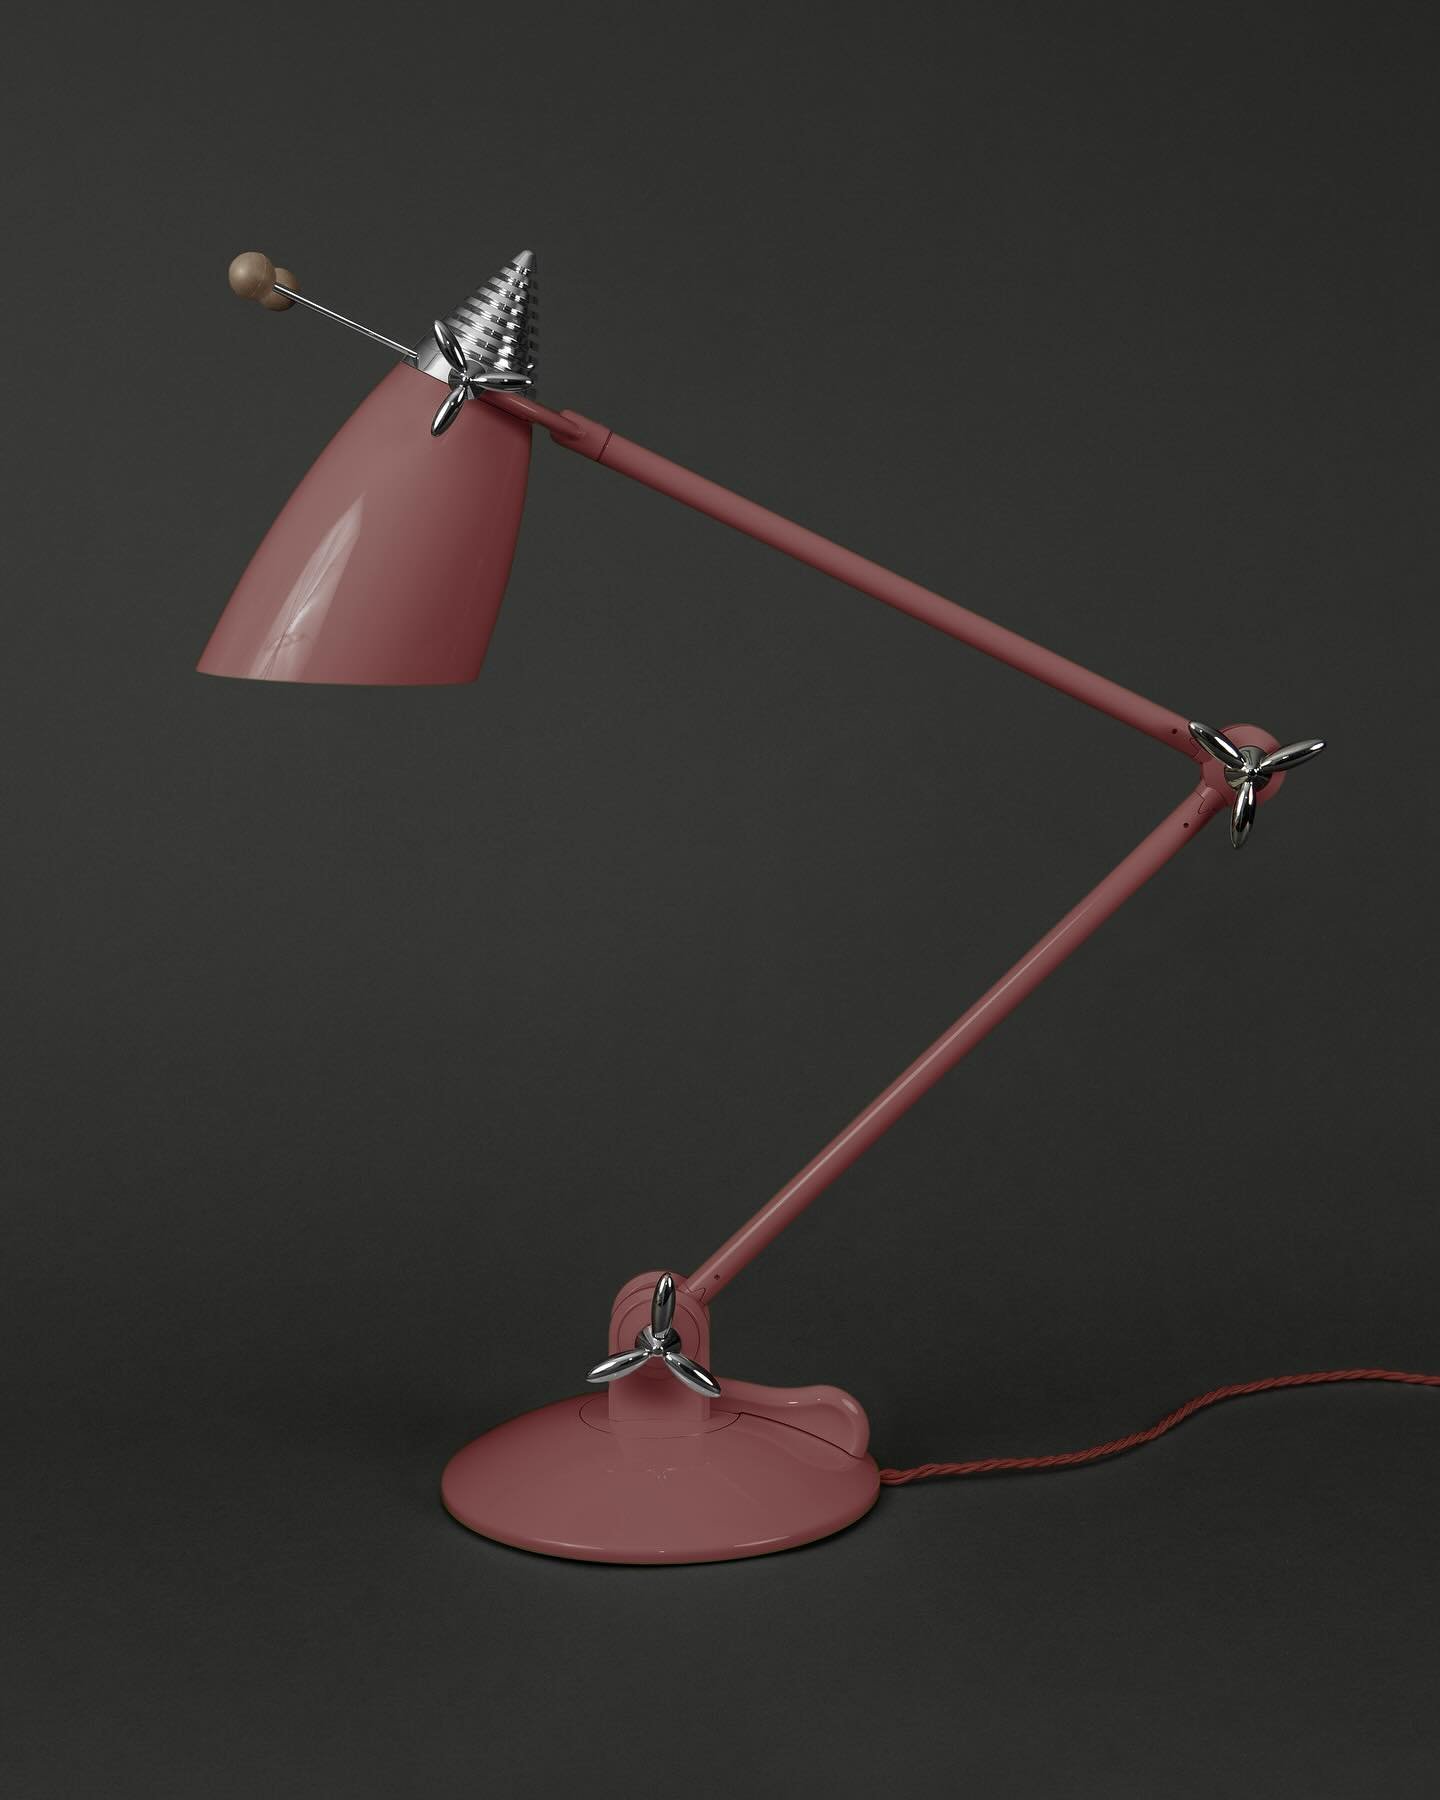 And then there was light. Say hello to ETL 2.0&hellip; This dusty English red and camel duo is the newest edition to the Task Lamp range. Edition of 10. Read more and order yours at www.cphill.com 
&middot;
&middot;
&middot; 
#design #FunctionalArt #